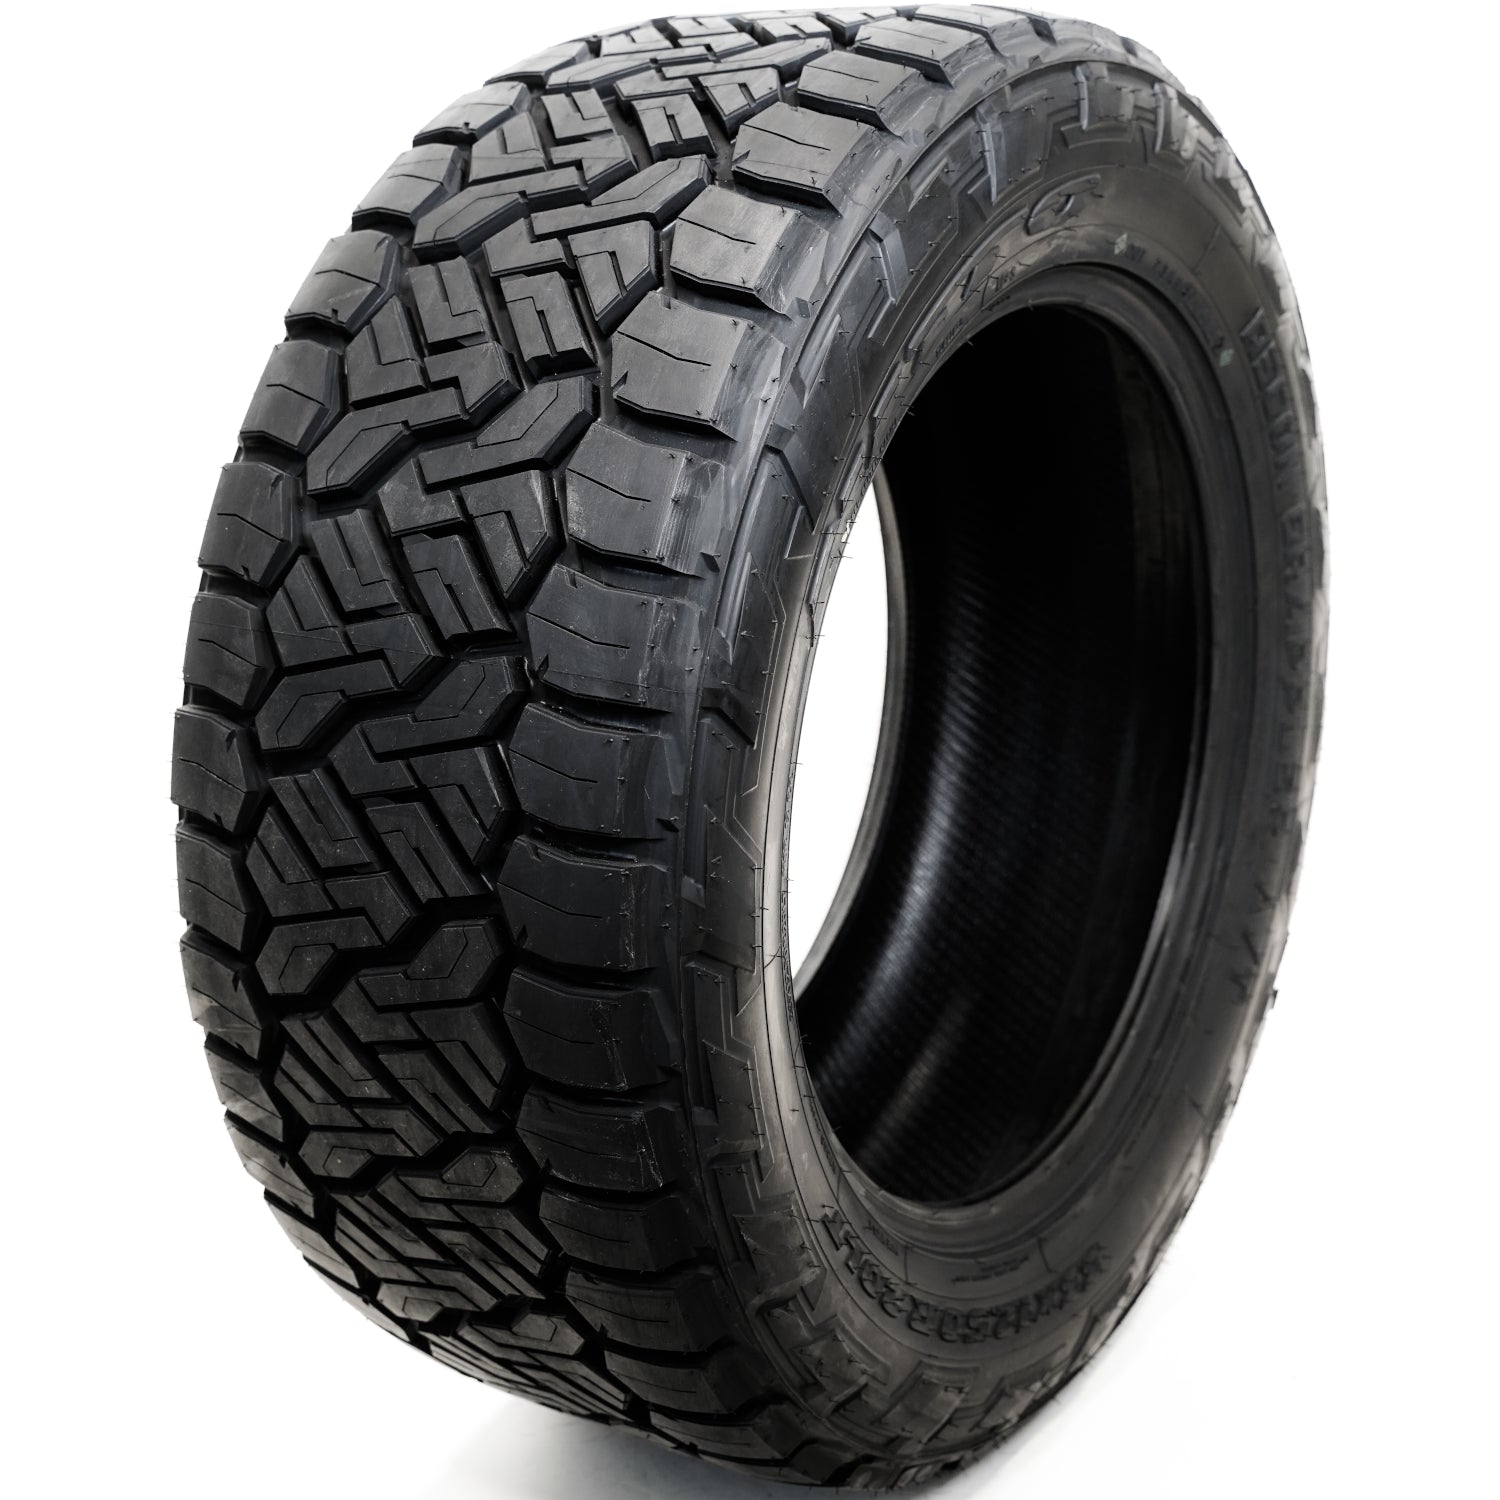 NITTO RECON GRAPPLER A/T LT34X11.50R20 Tires